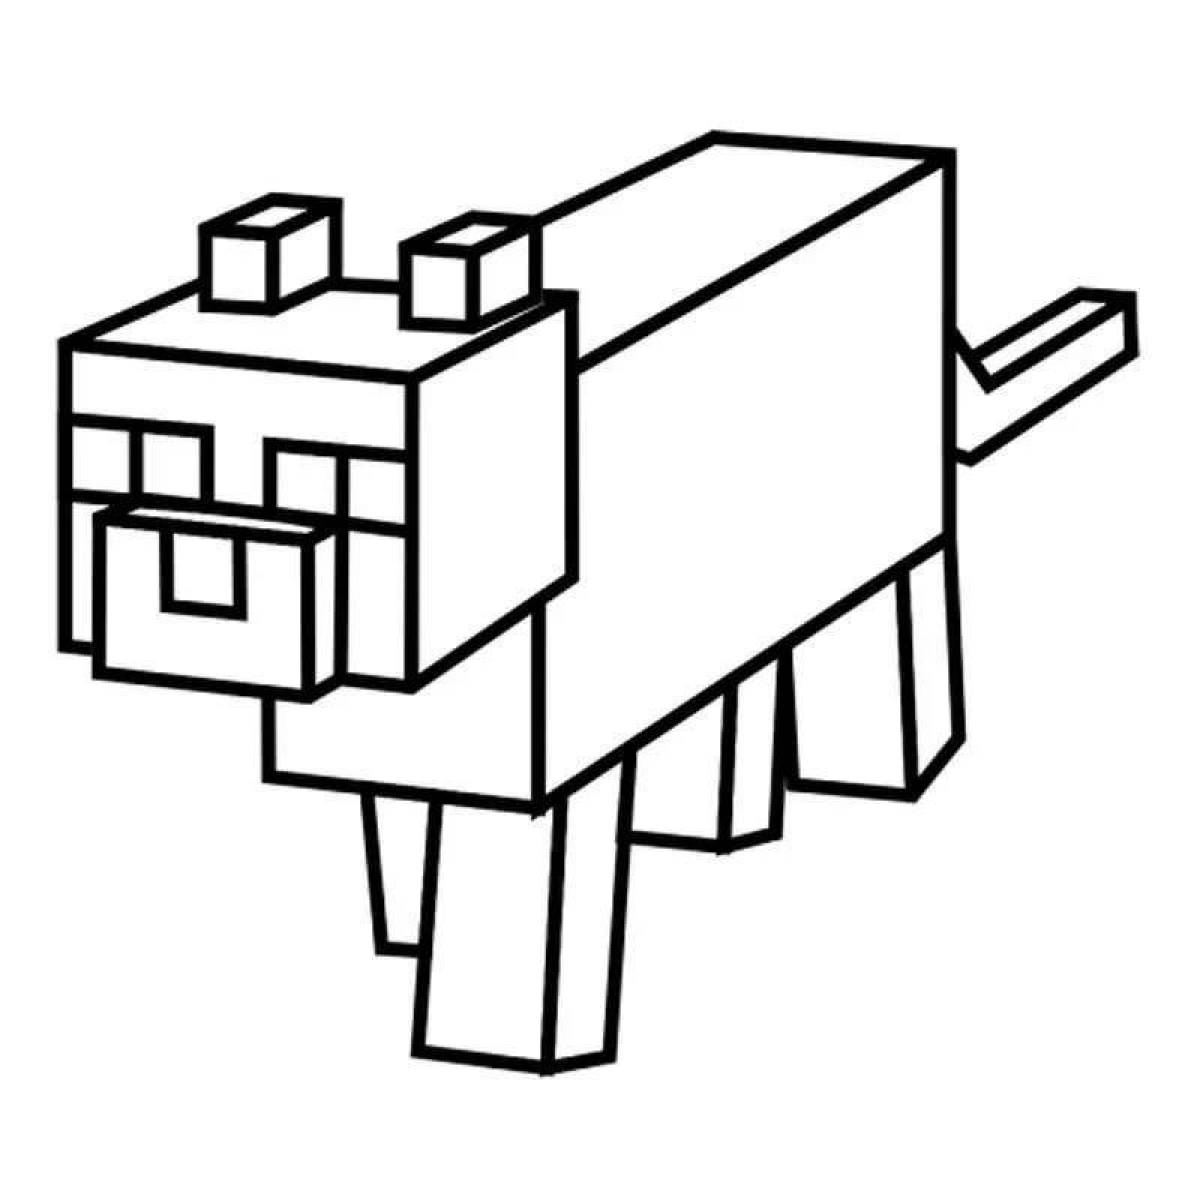 Zany minecraft cat coloring page